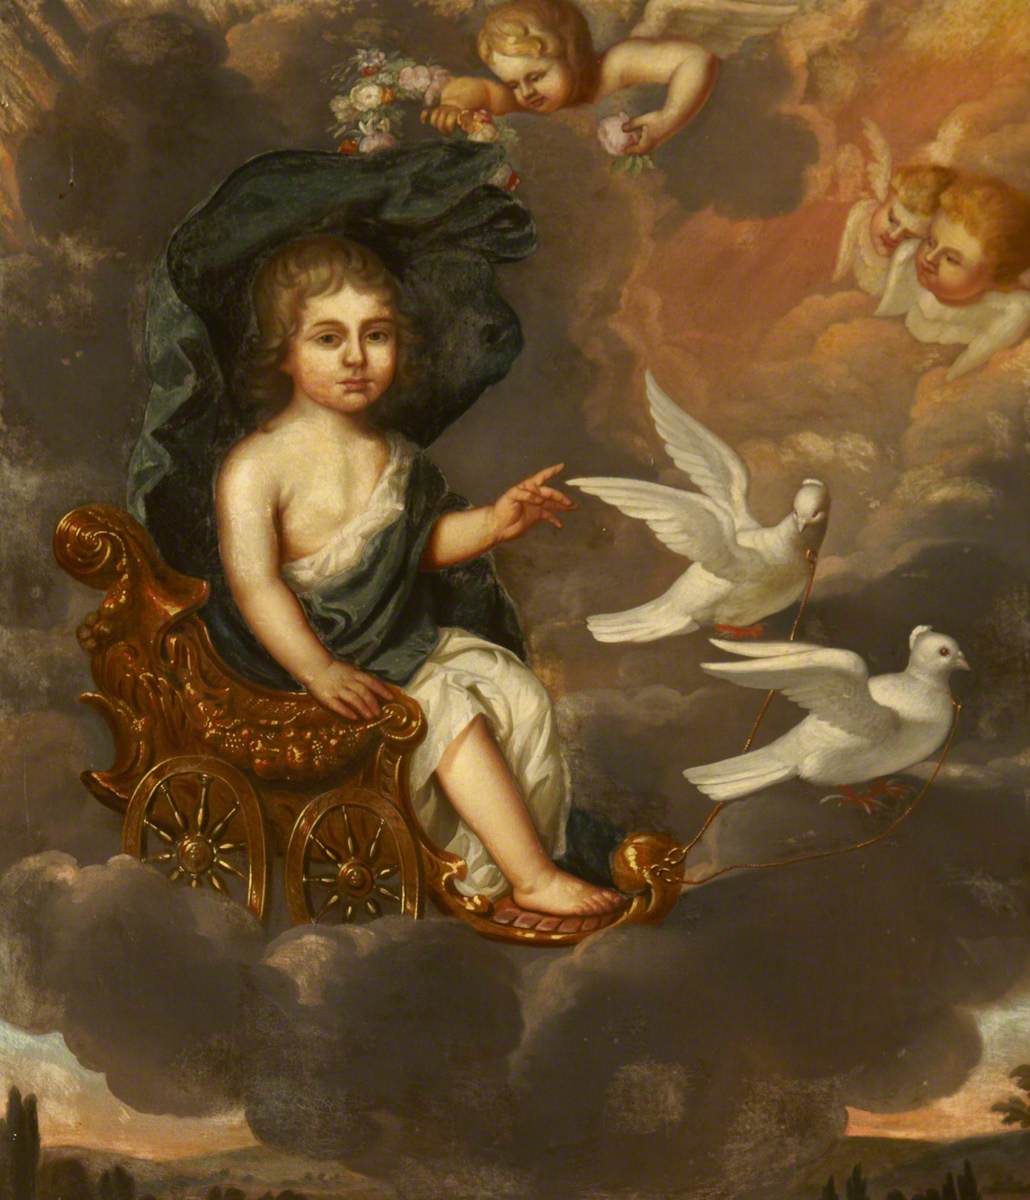 A Child Seated in a Chariot Pulled by Doves as the Infant Venus